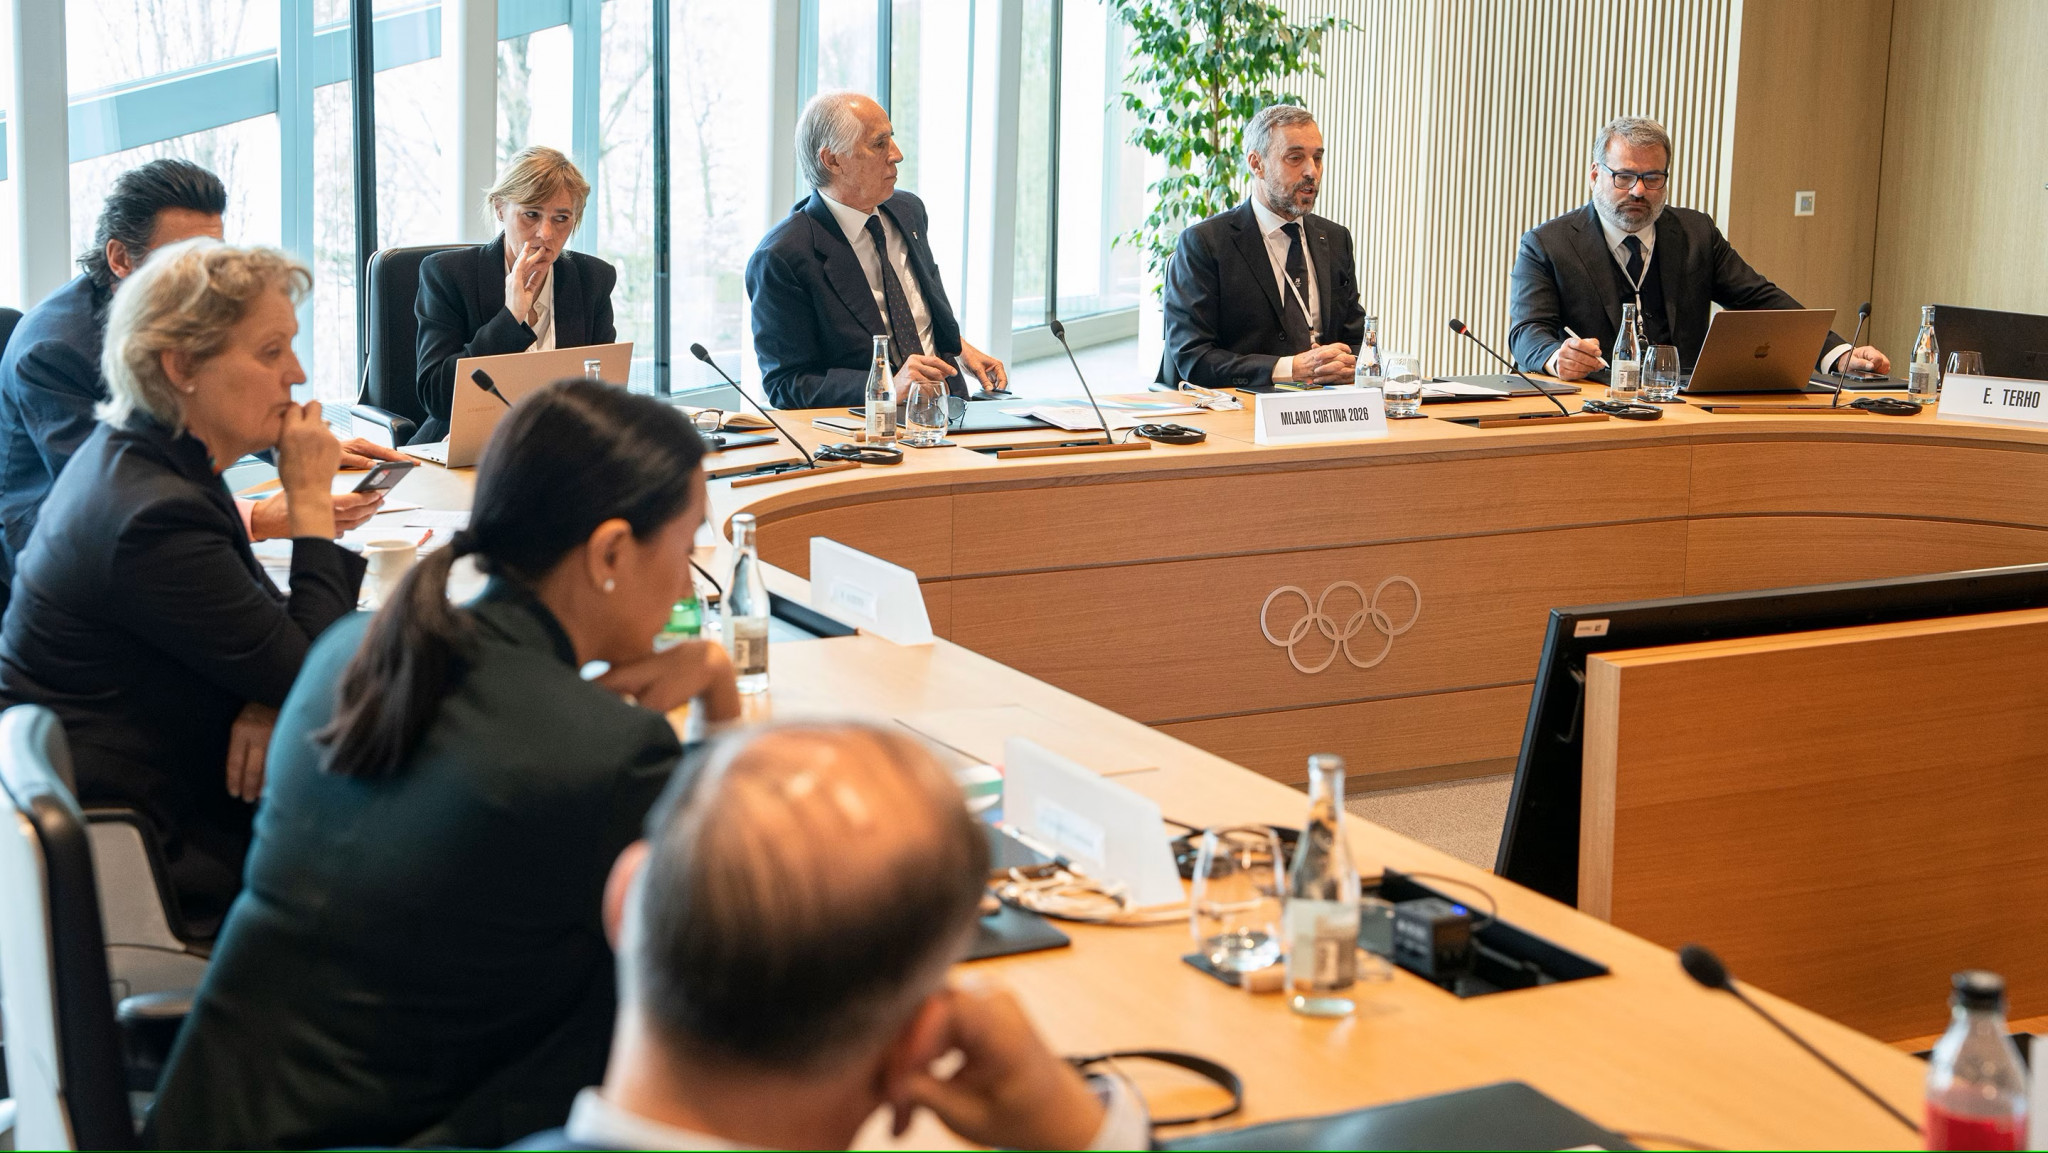 IOC Executive Board notes "productive start" to year for Milan Cortina 2026